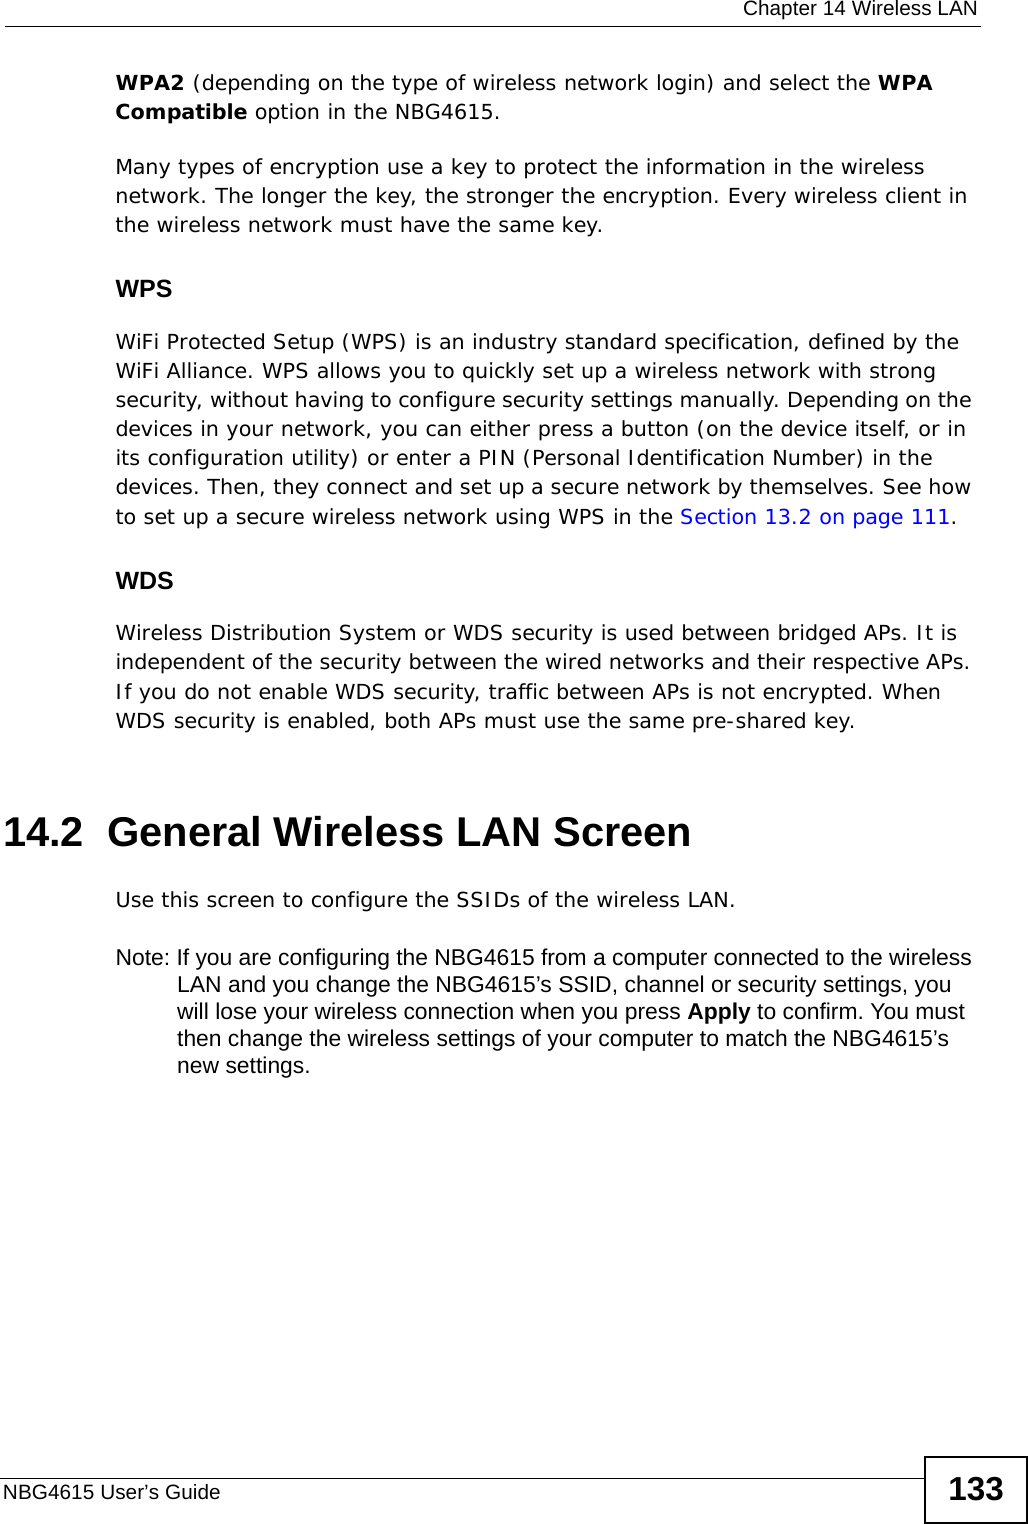  Chapter 14 Wireless LANNBG4615 User’s Guide 133WPA2 (depending on the type of wireless network login) and select the WPA Compatible option in the NBG4615.Many types of encryption use a key to protect the information in the wireless network. The longer the key, the stronger the encryption. Every wireless client in the wireless network must have the same key.WPSWiFi Protected Setup (WPS) is an industry standard specification, defined by the WiFi Alliance. WPS allows you to quickly set up a wireless network with strong security, without having to configure security settings manually. Depending on the devices in your network, you can either press a button (on the device itself, or in its configuration utility) or enter a PIN (Personal Identification Number) in the devices. Then, they connect and set up a secure network by themselves. See how to set up a secure wireless network using WPS in the Section 13.2 on page 111. WDSWireless Distribution System or WDS security is used between bridged APs. It is independent of the security between the wired networks and their respective APs. If you do not enable WDS security, traffic between APs is not encrypted. When WDS security is enabled, both APs must use the same pre-shared key.14.2  General Wireless LAN Screen Use this screen to configure the SSIDs of the wireless LAN.Note: If you are configuring the NBG4615 from a computer connected to the wireless LAN and you change the NBG4615’s SSID, channel or security settings, you will lose your wireless connection when you press Apply to confirm. You must then change the wireless settings of your computer to match the NBG4615’s new settings.